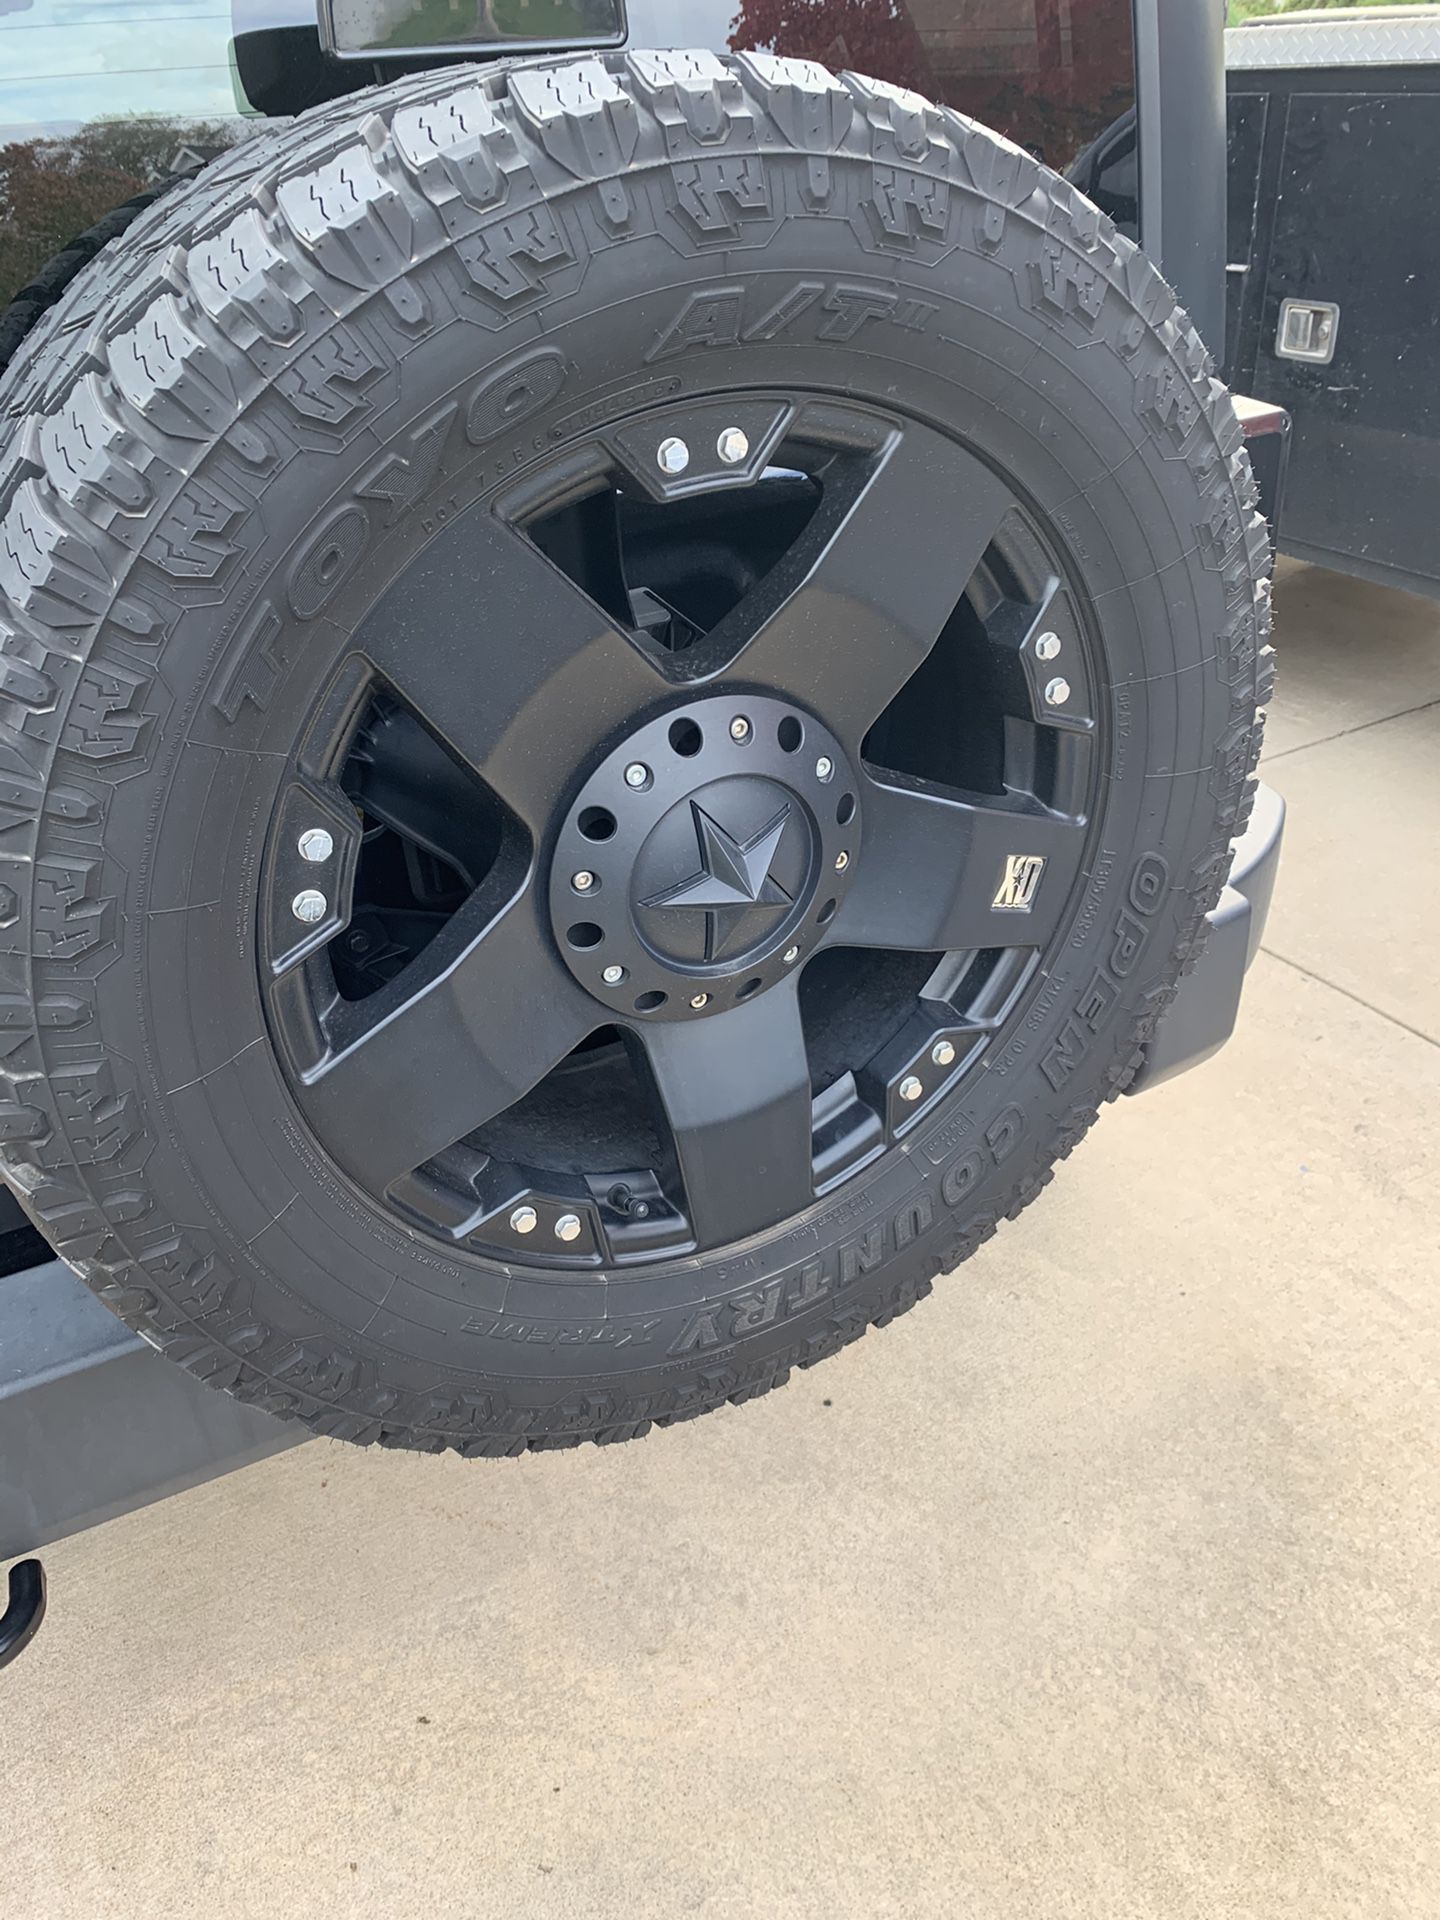 Rockstar wheels and tires for Jeep